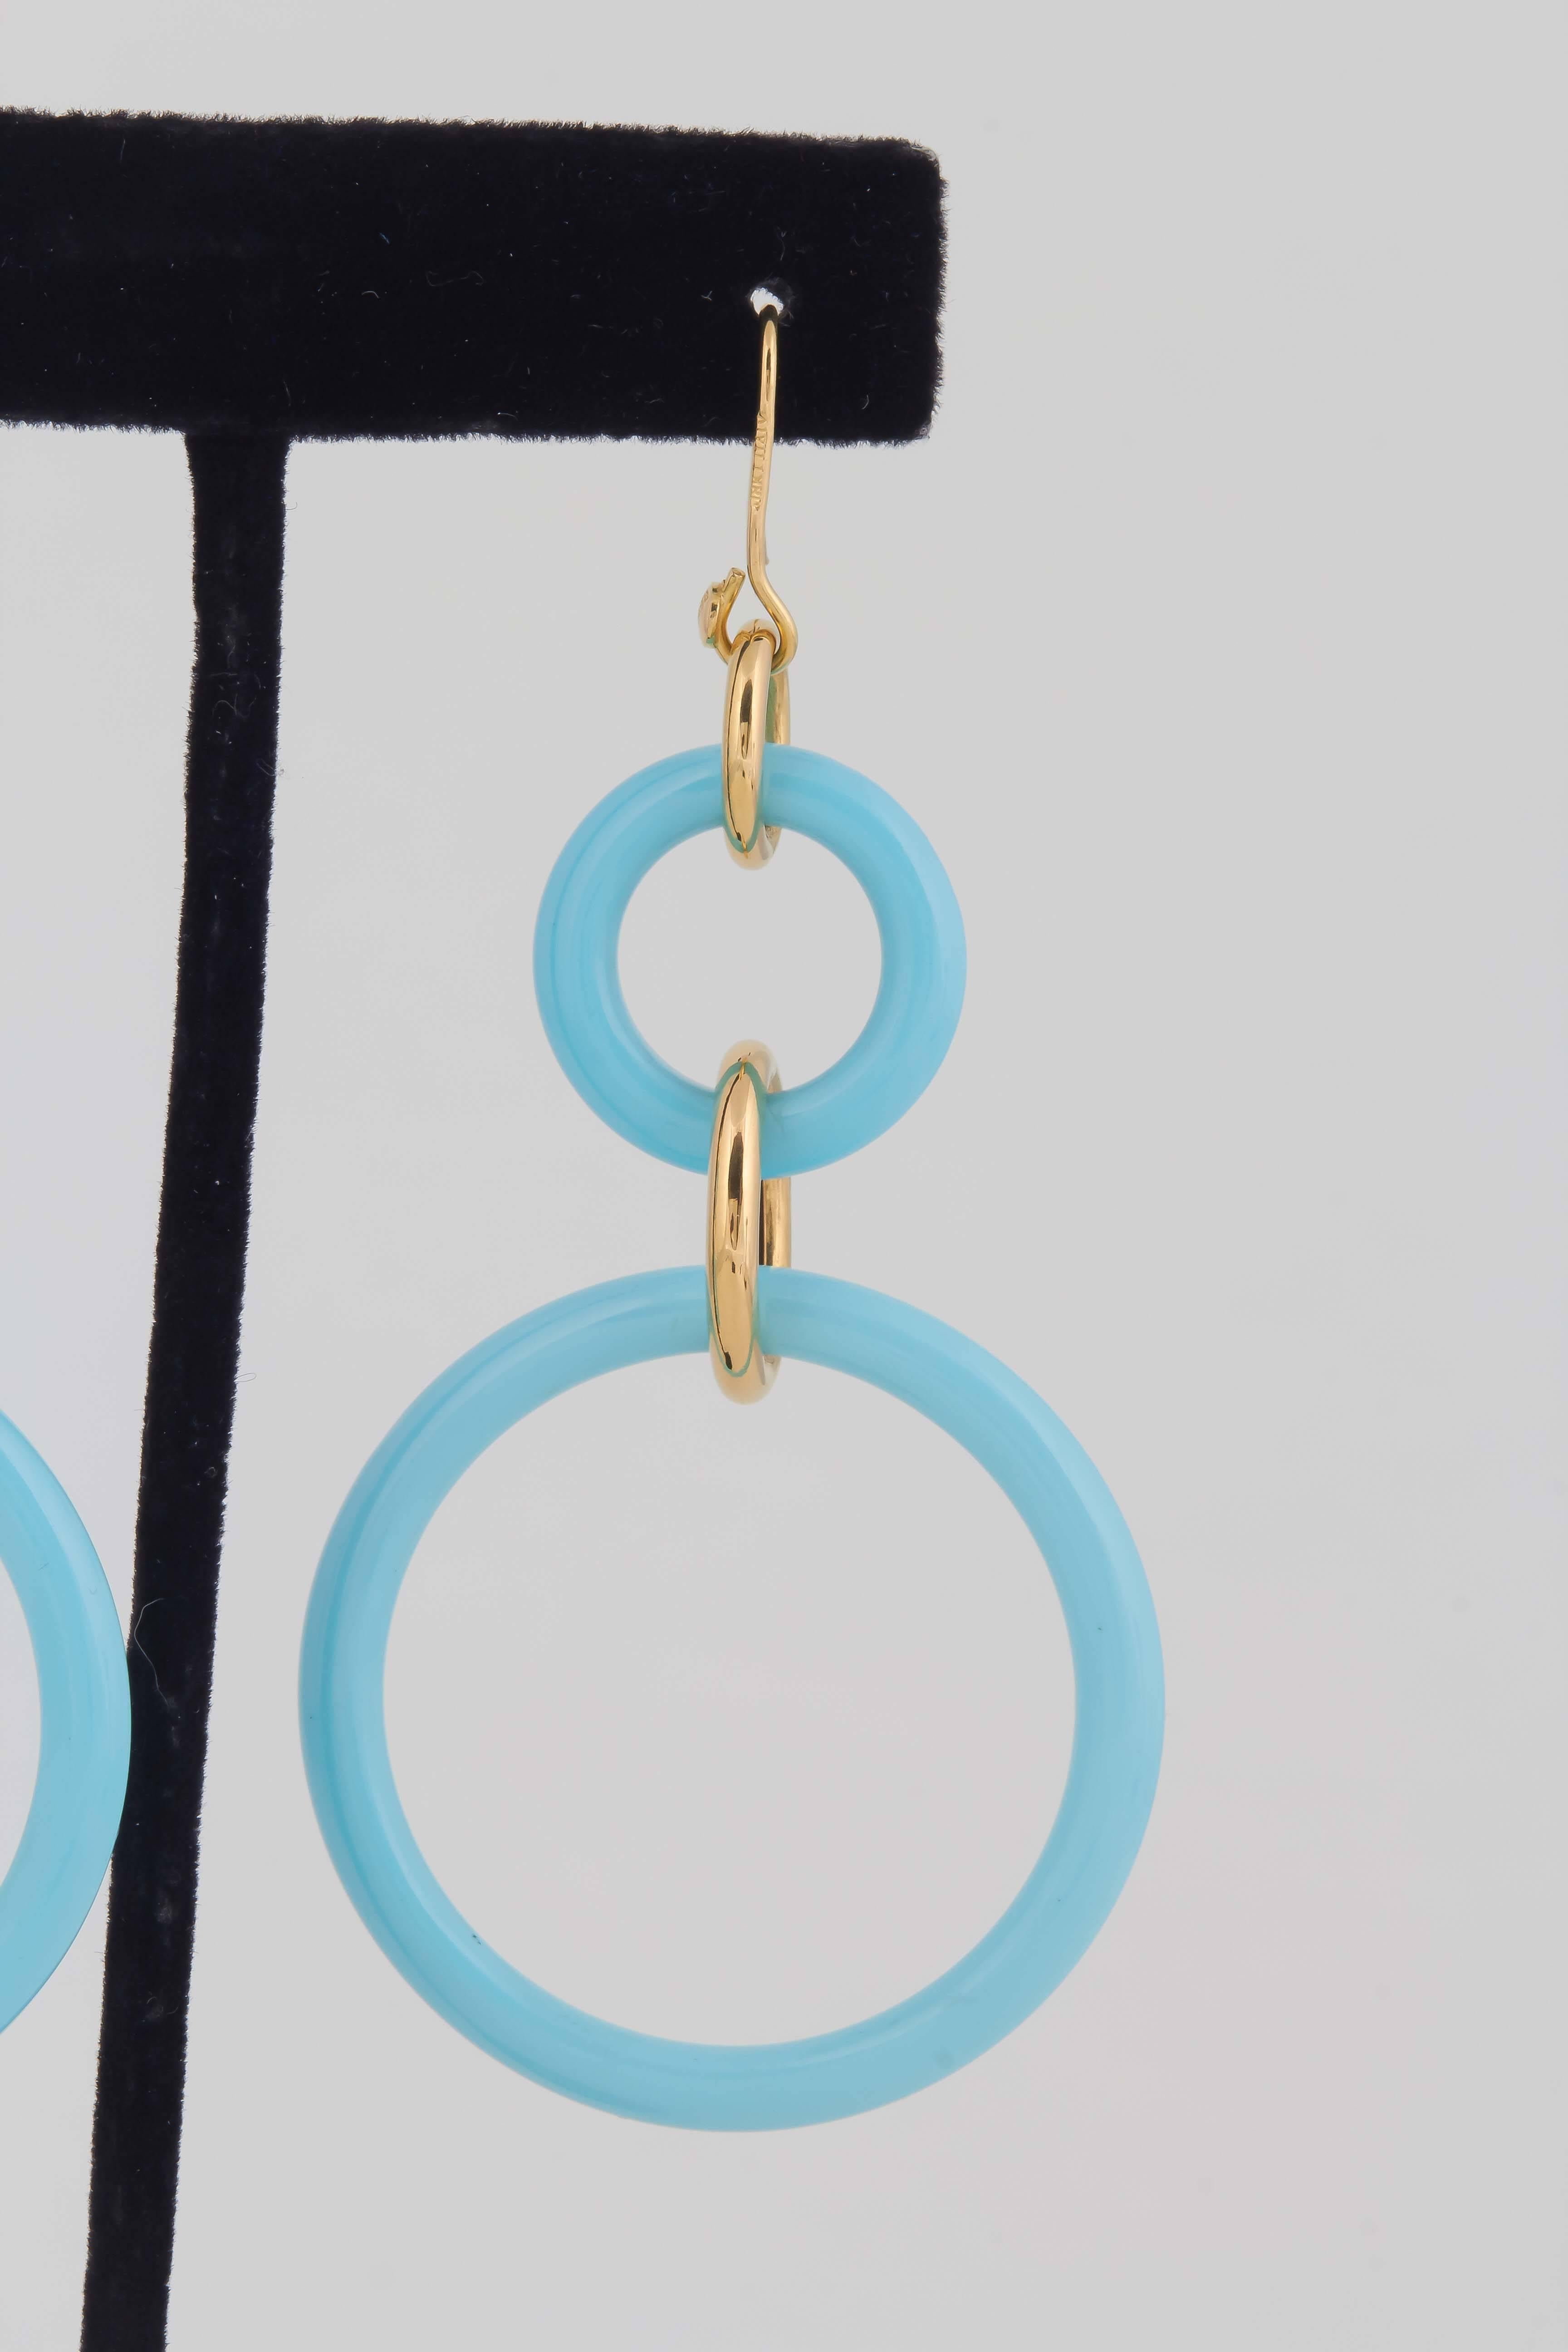 18kt Yellow Gold Hanging Moveable Earrings Designed With 4 Custom Cut Round Turquoises Interlocked By Smaller 18kt Gold Loops To Create Movement Made By Faraone Menella In The 1990's.